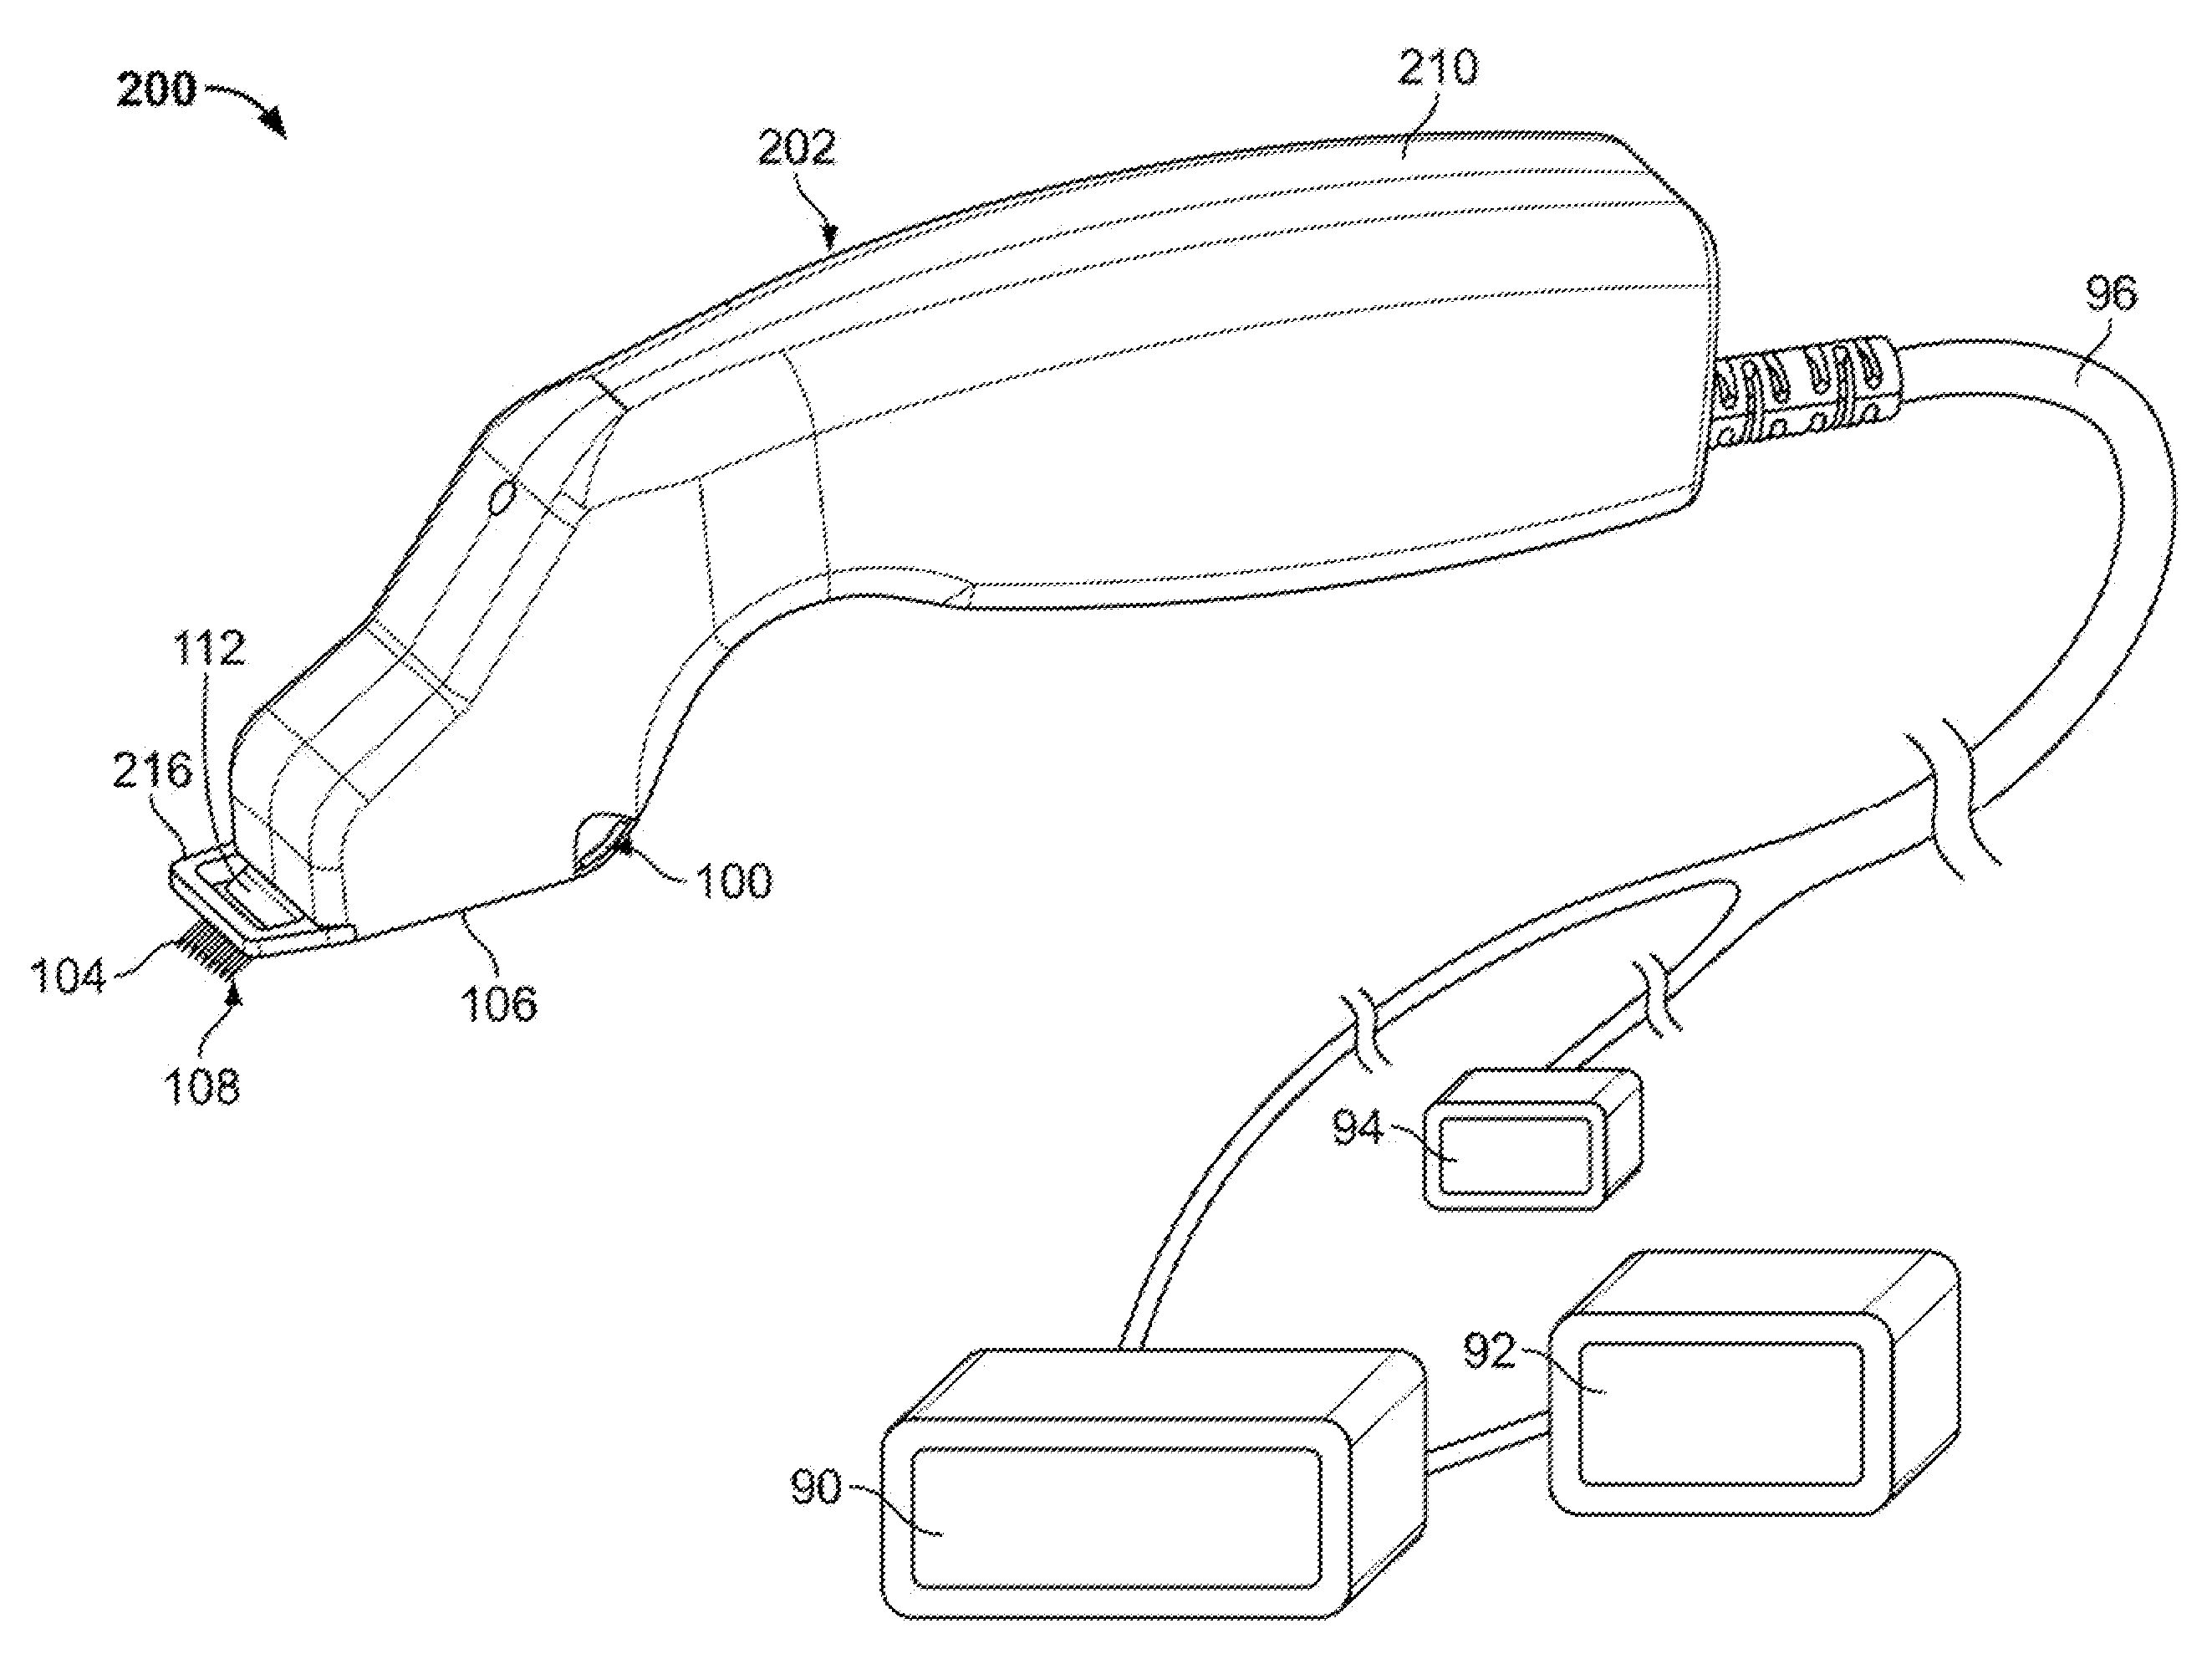 Devices and methods for percutaneous energy delivery